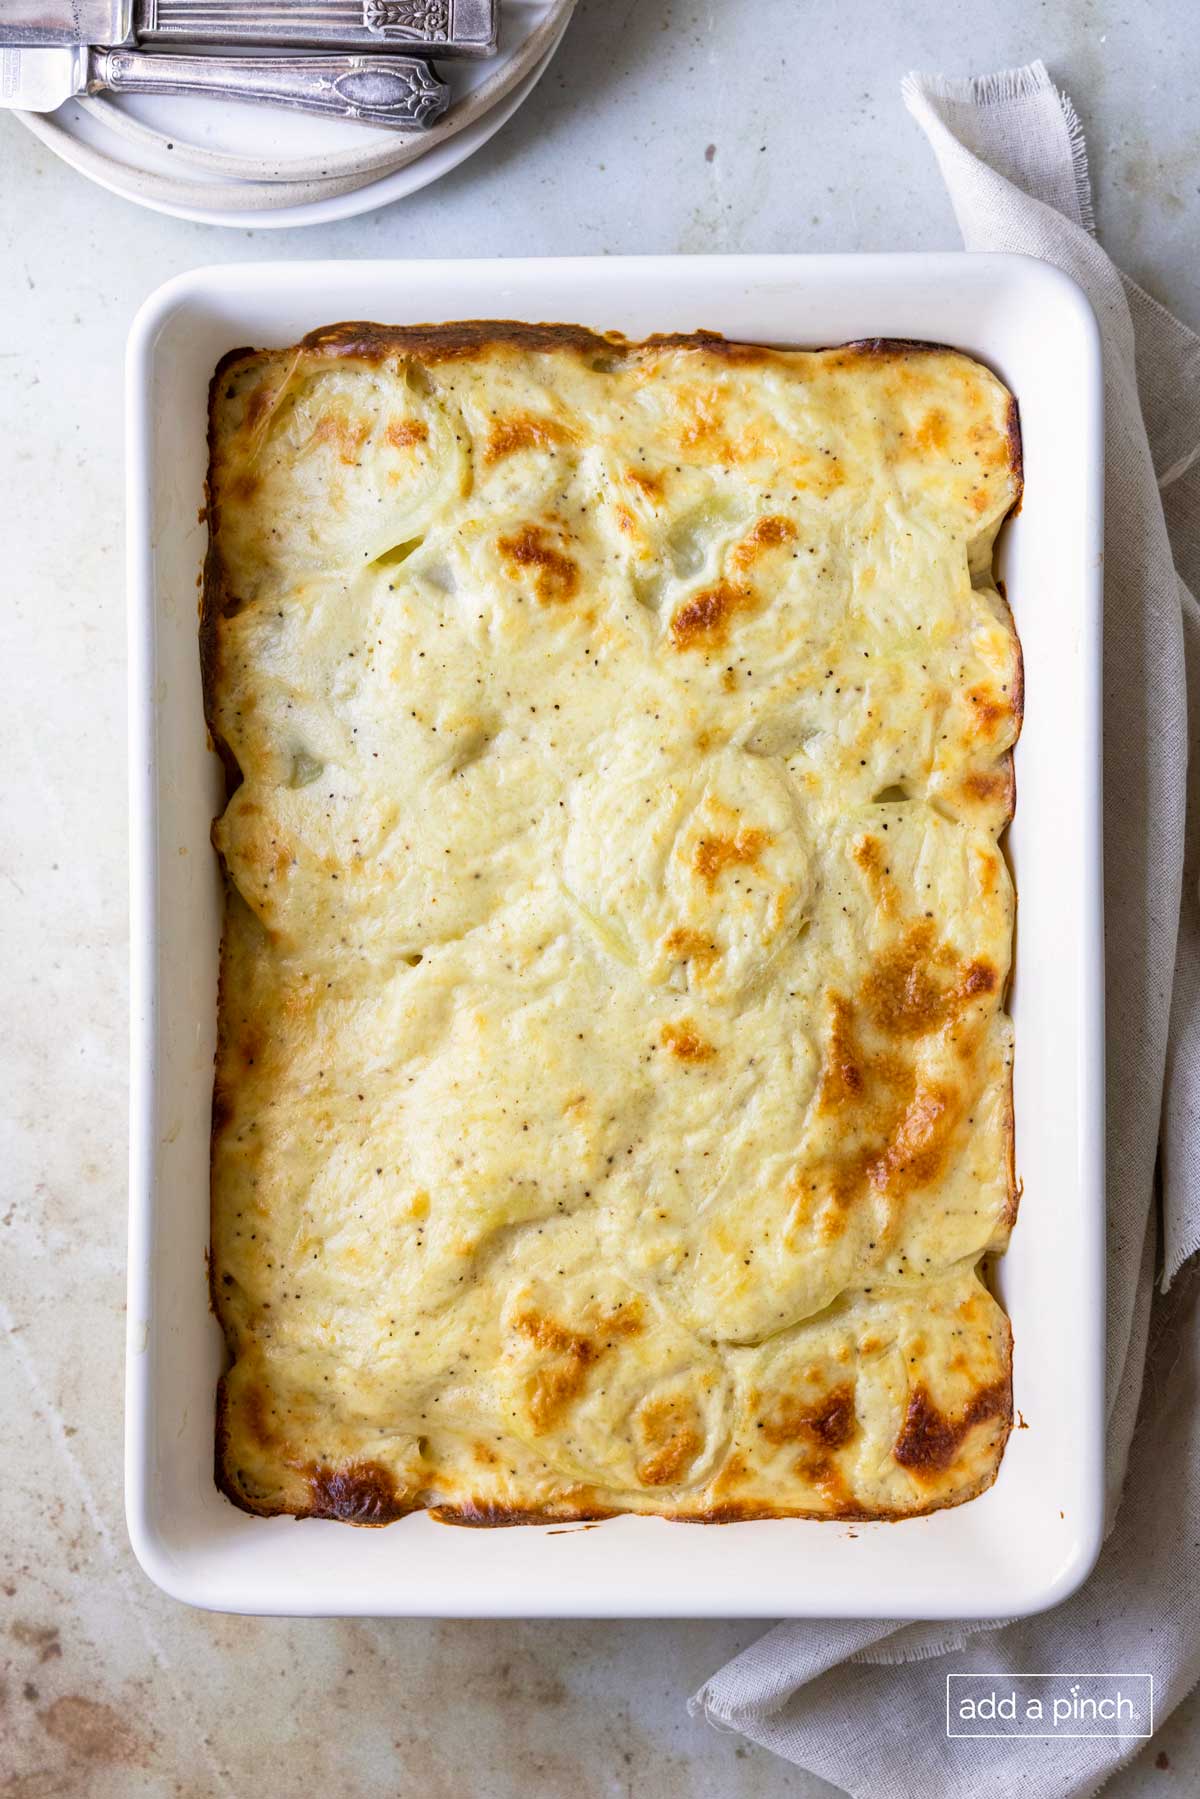 Photo of baked scalloped potatoes in a white baking dish.